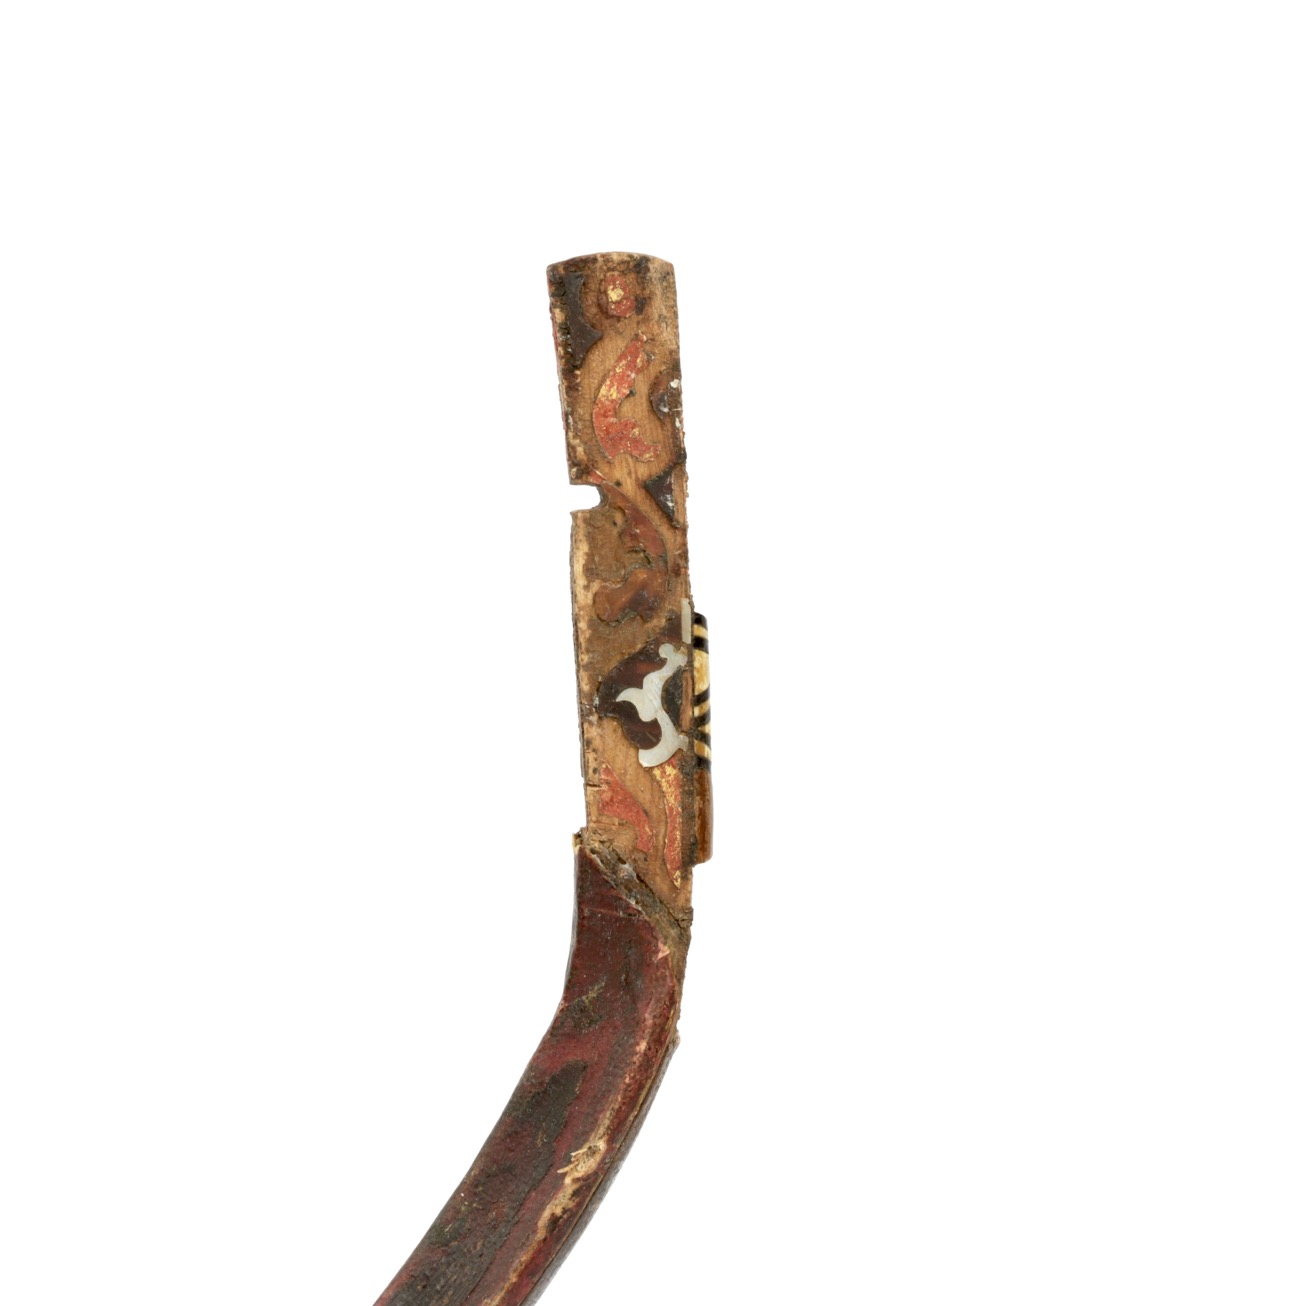 An early Ottoman bow, probably dating from the 16th century